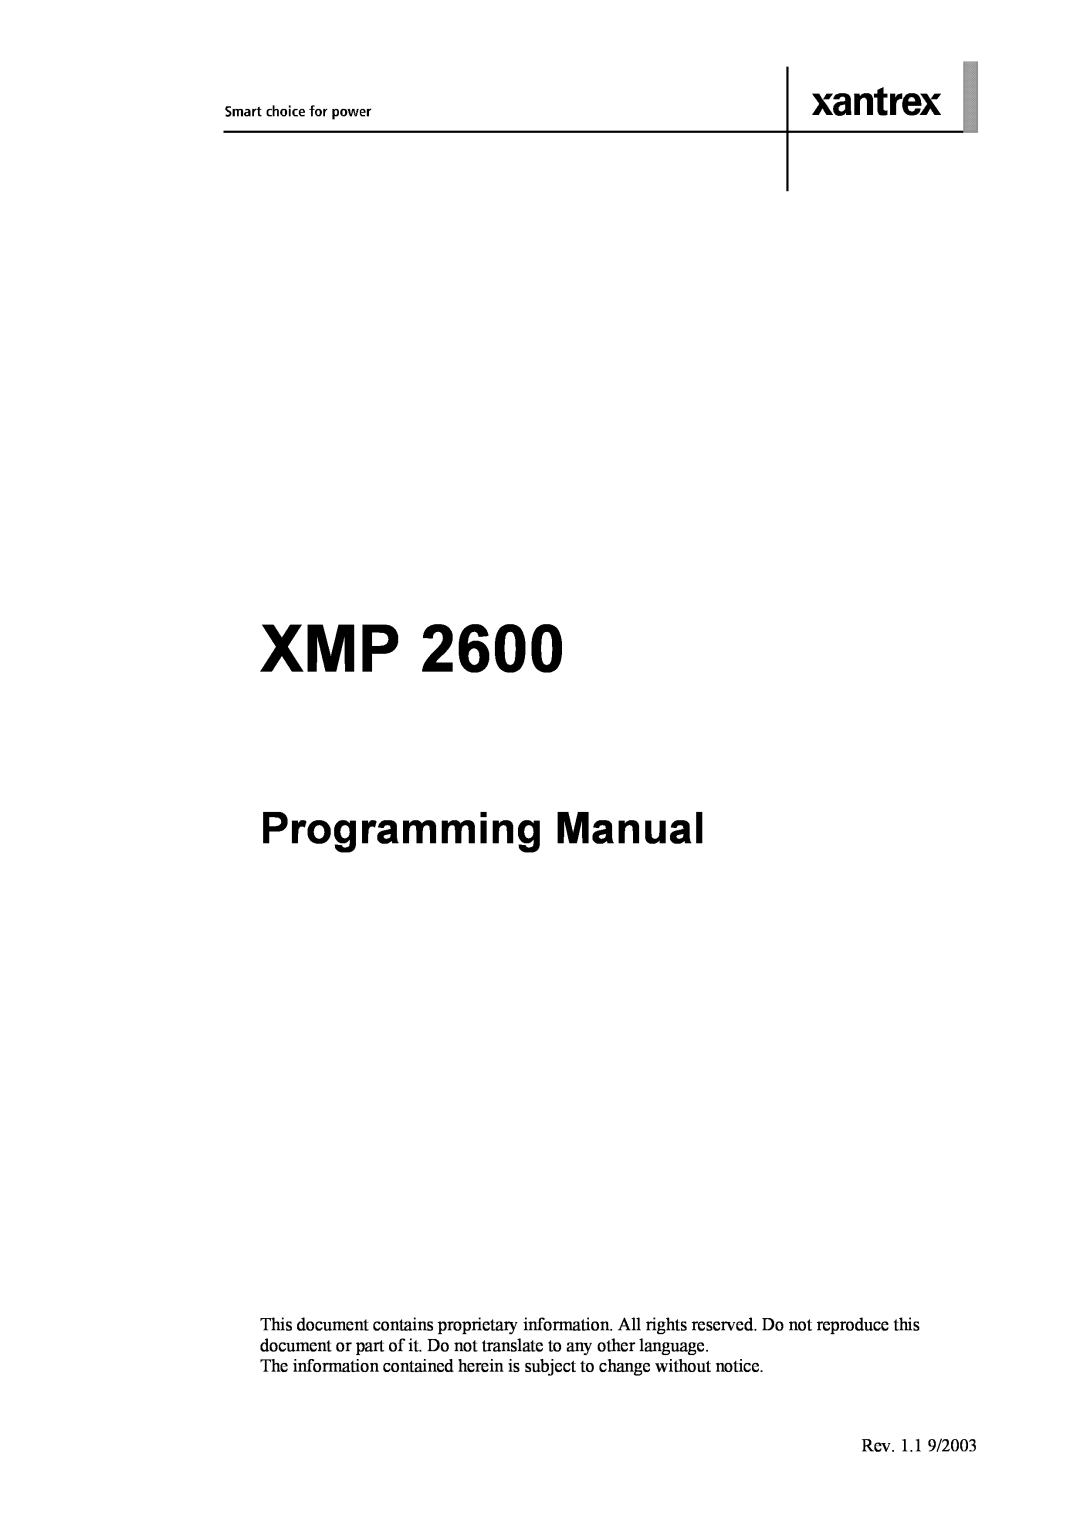 Xantrex Technology XMP 2600 manual Programming Manual, The information contained herein is subject to change without notice 